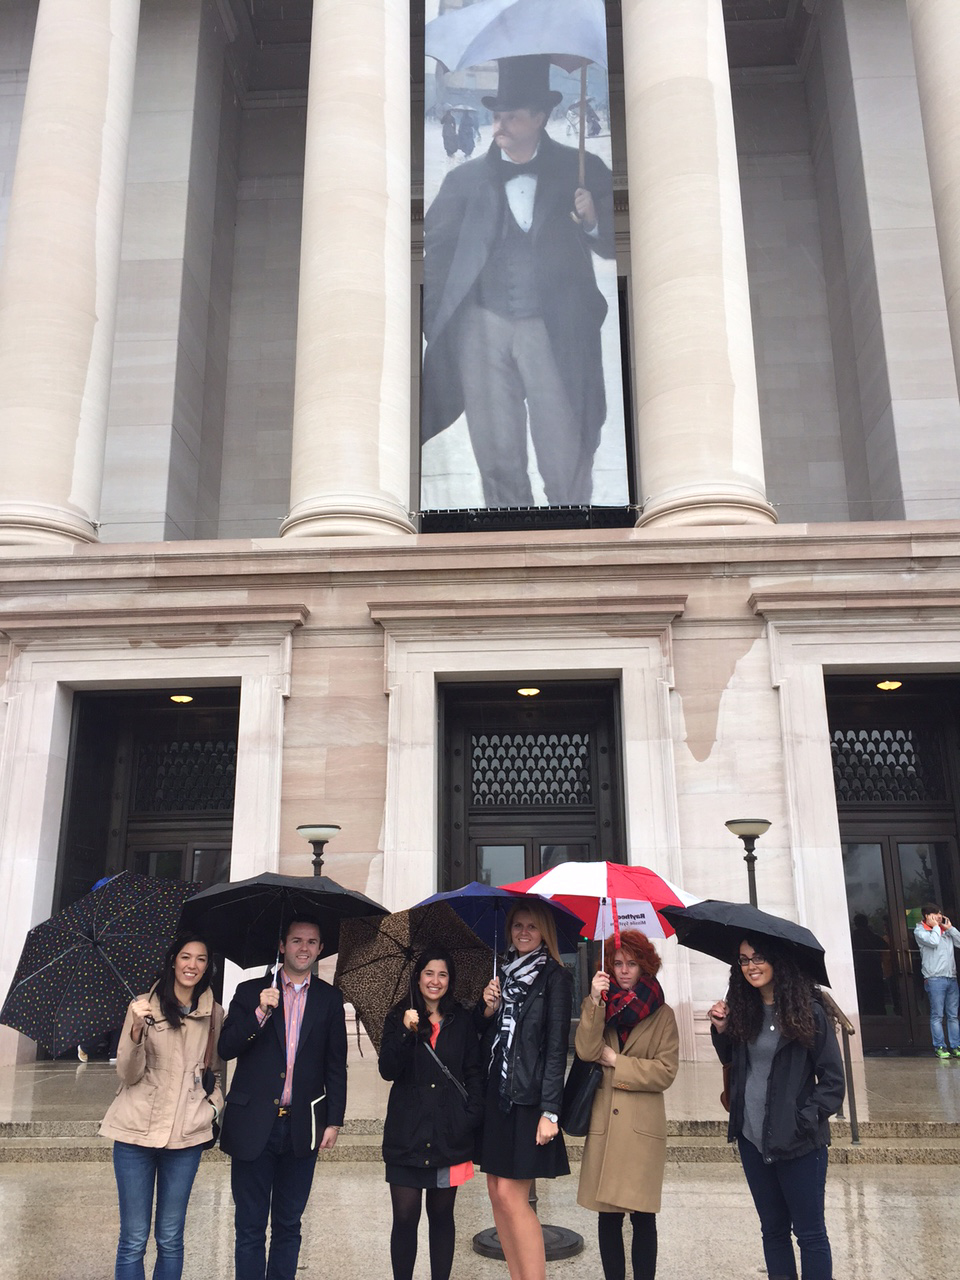 Students at the Caillebotte exhibition in Washington